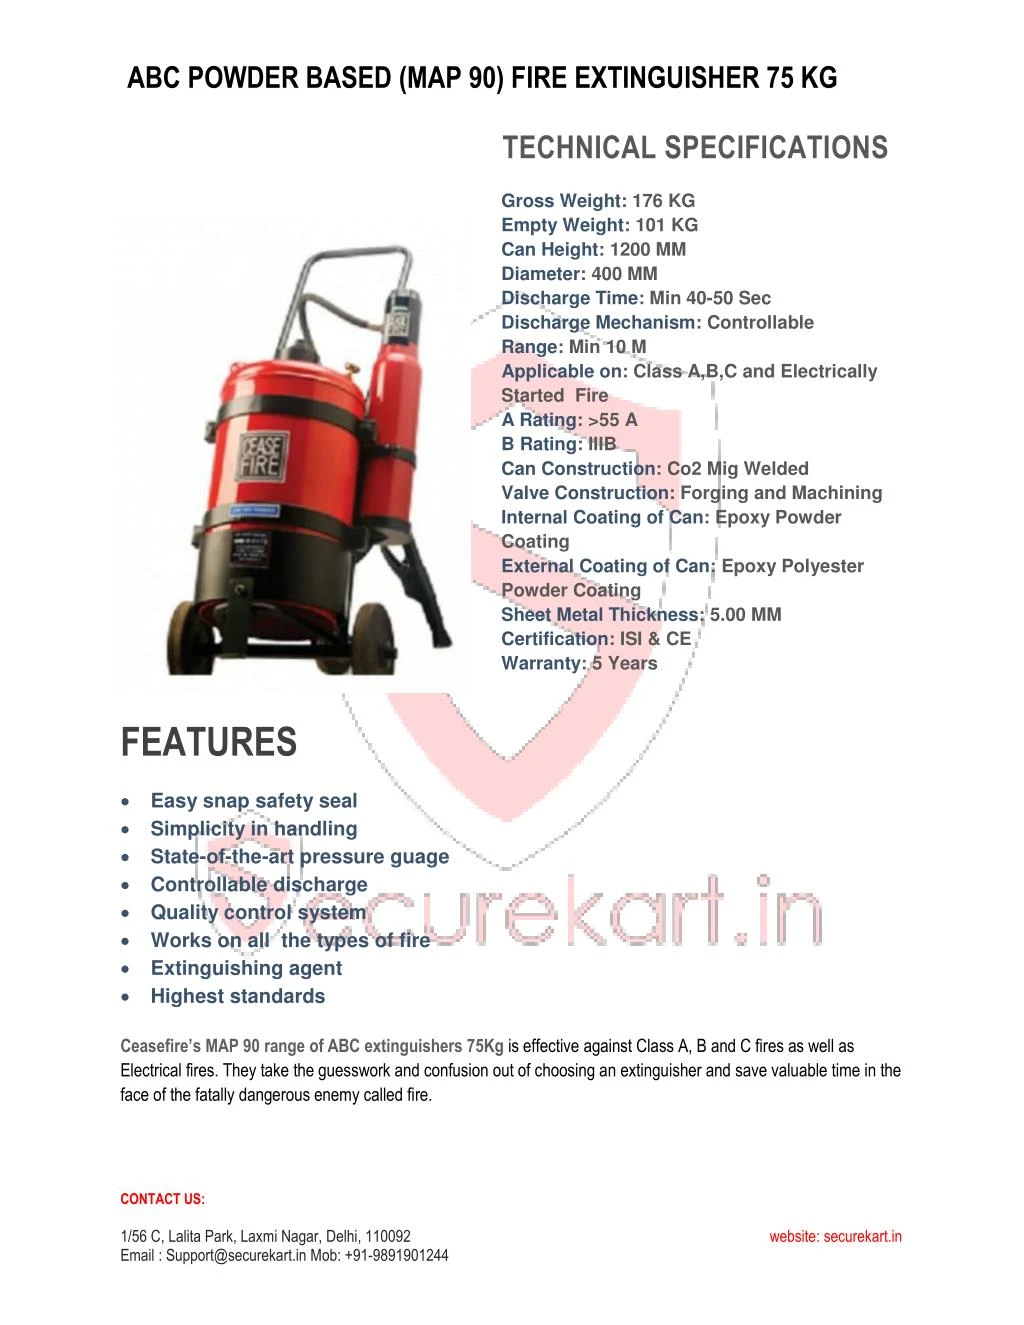 PPT - Ceasefire Abc Fire Extinguisher Map 90 - 75KG Features &  Specifications PowerPoint Presentation - ID:7414144